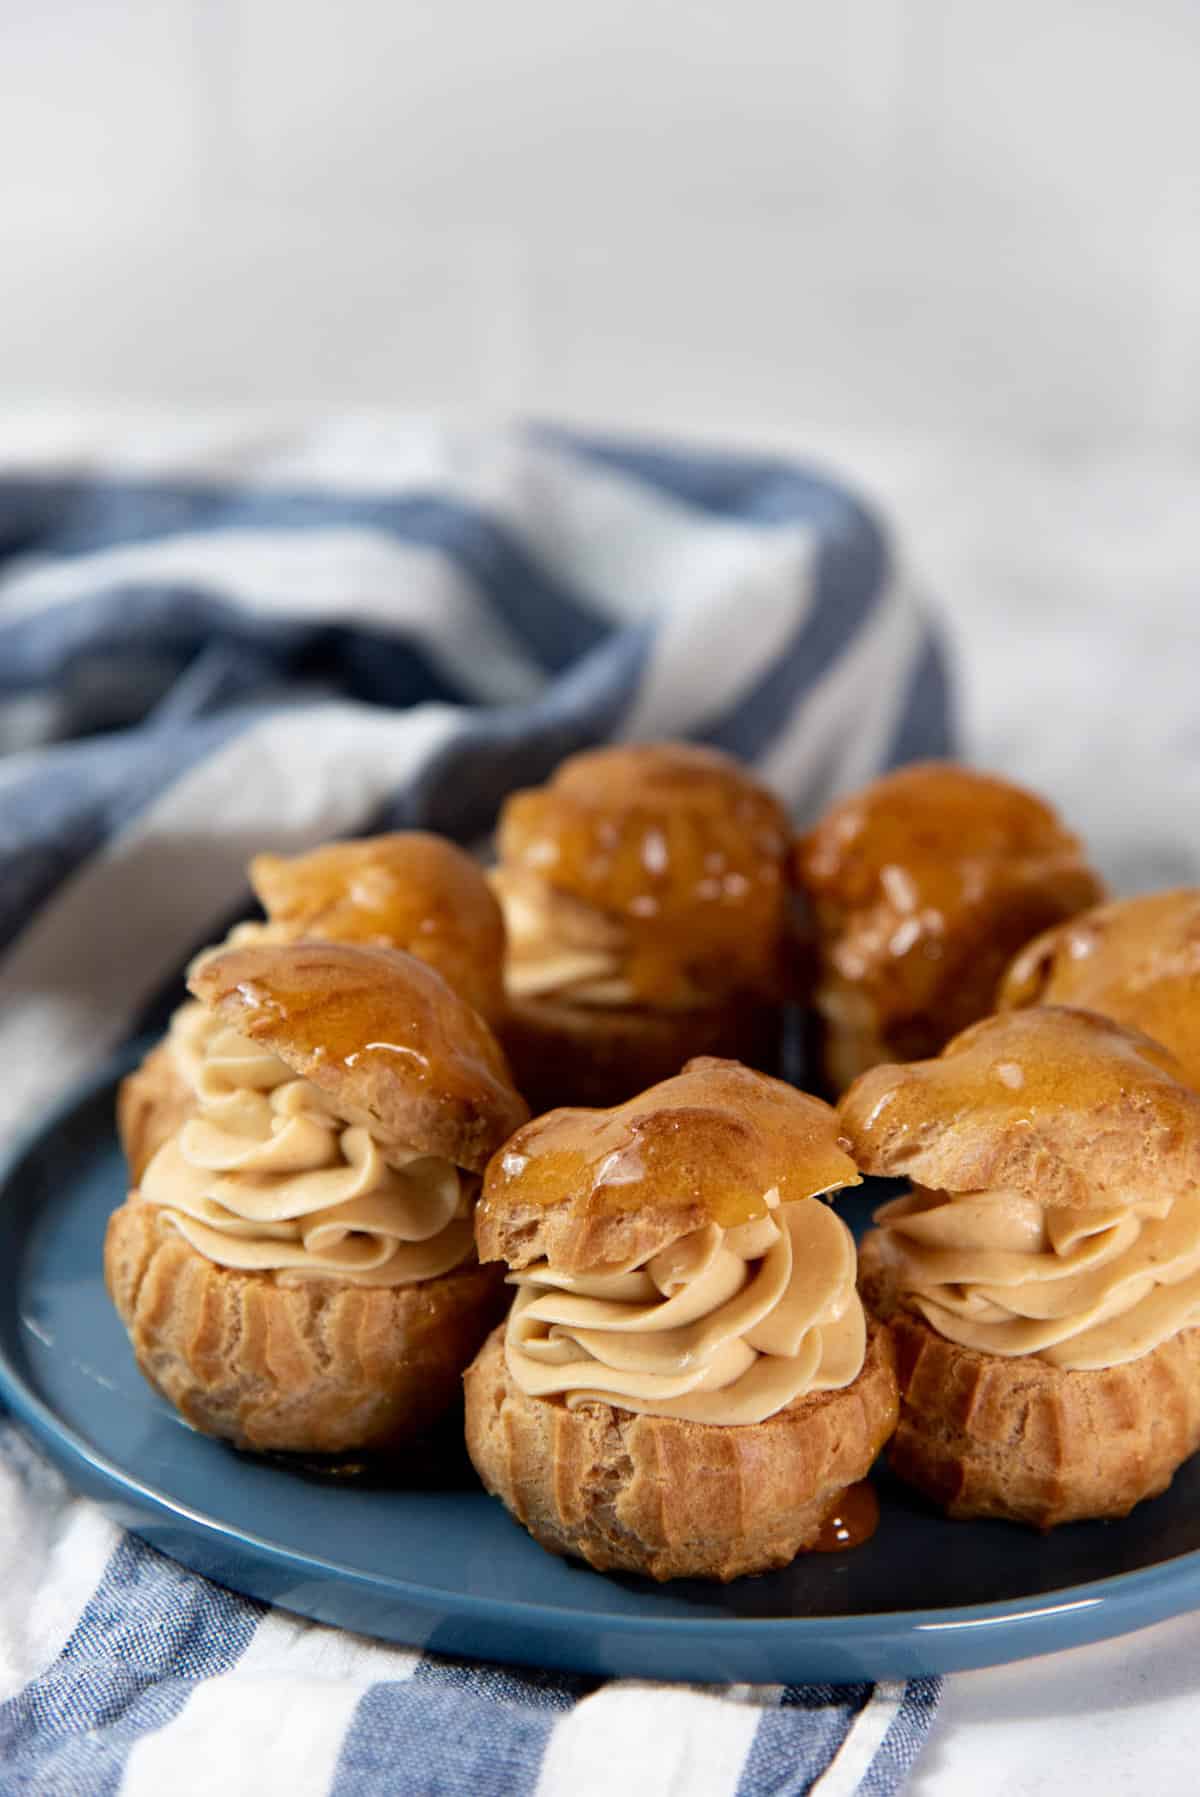 A Paris Brest variation made with profiteroles that are stuck together with caramel.